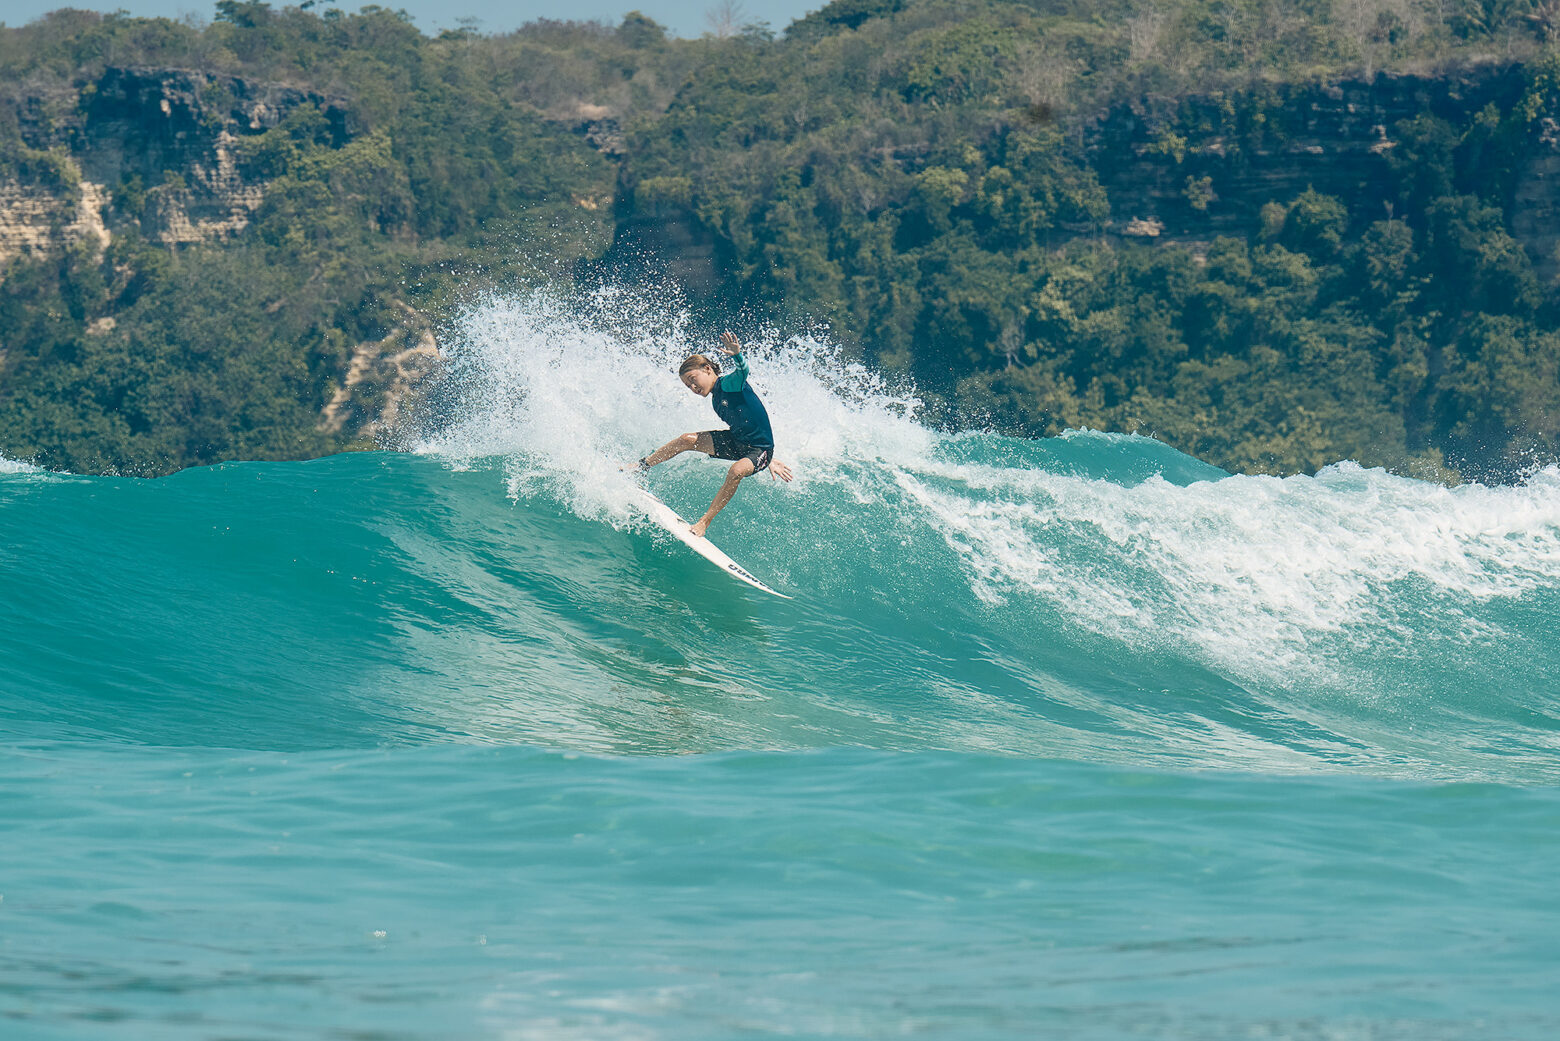 Jetty loving his time in Indo